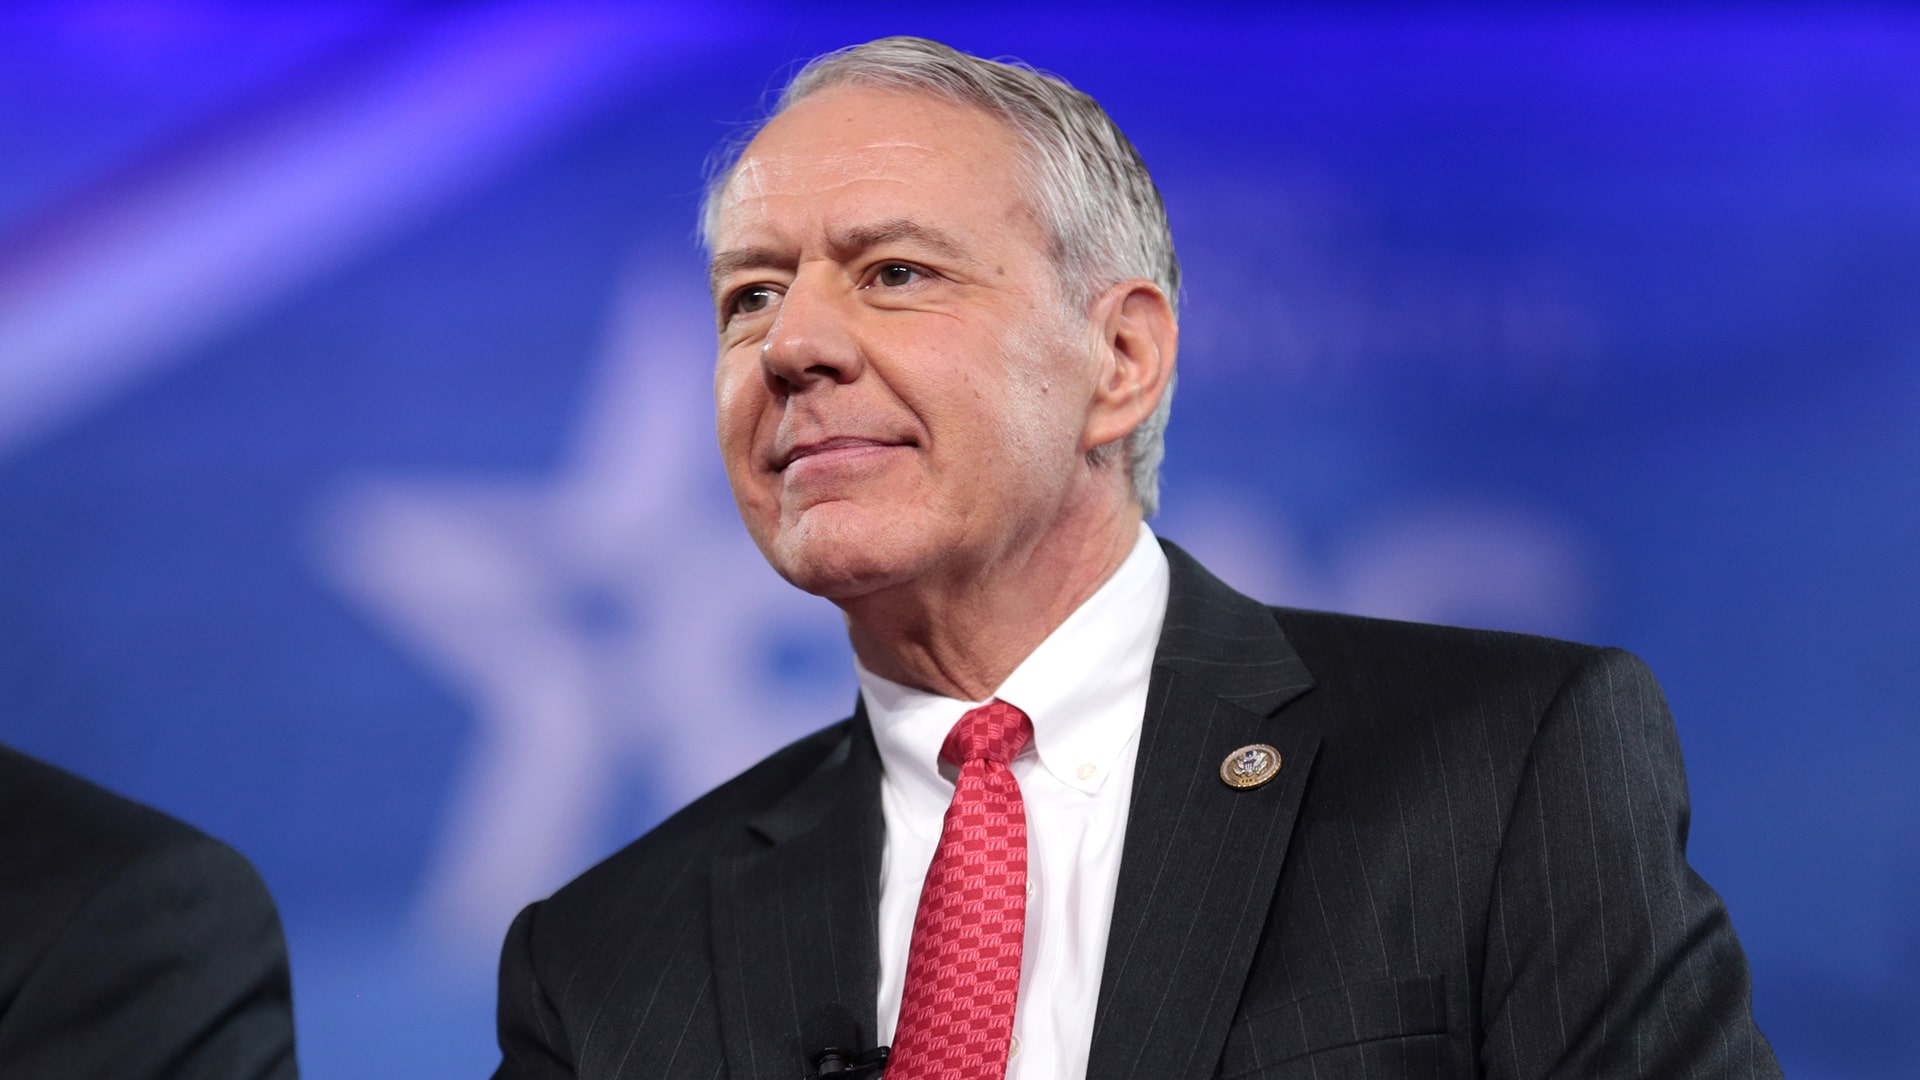 U.S. Congressman Ken Buck speaking at the 2017 Conservative Political Action Conference (CPAC) in National Harbor, Maryland. Gage Skidmore via Wikimedia Commons.